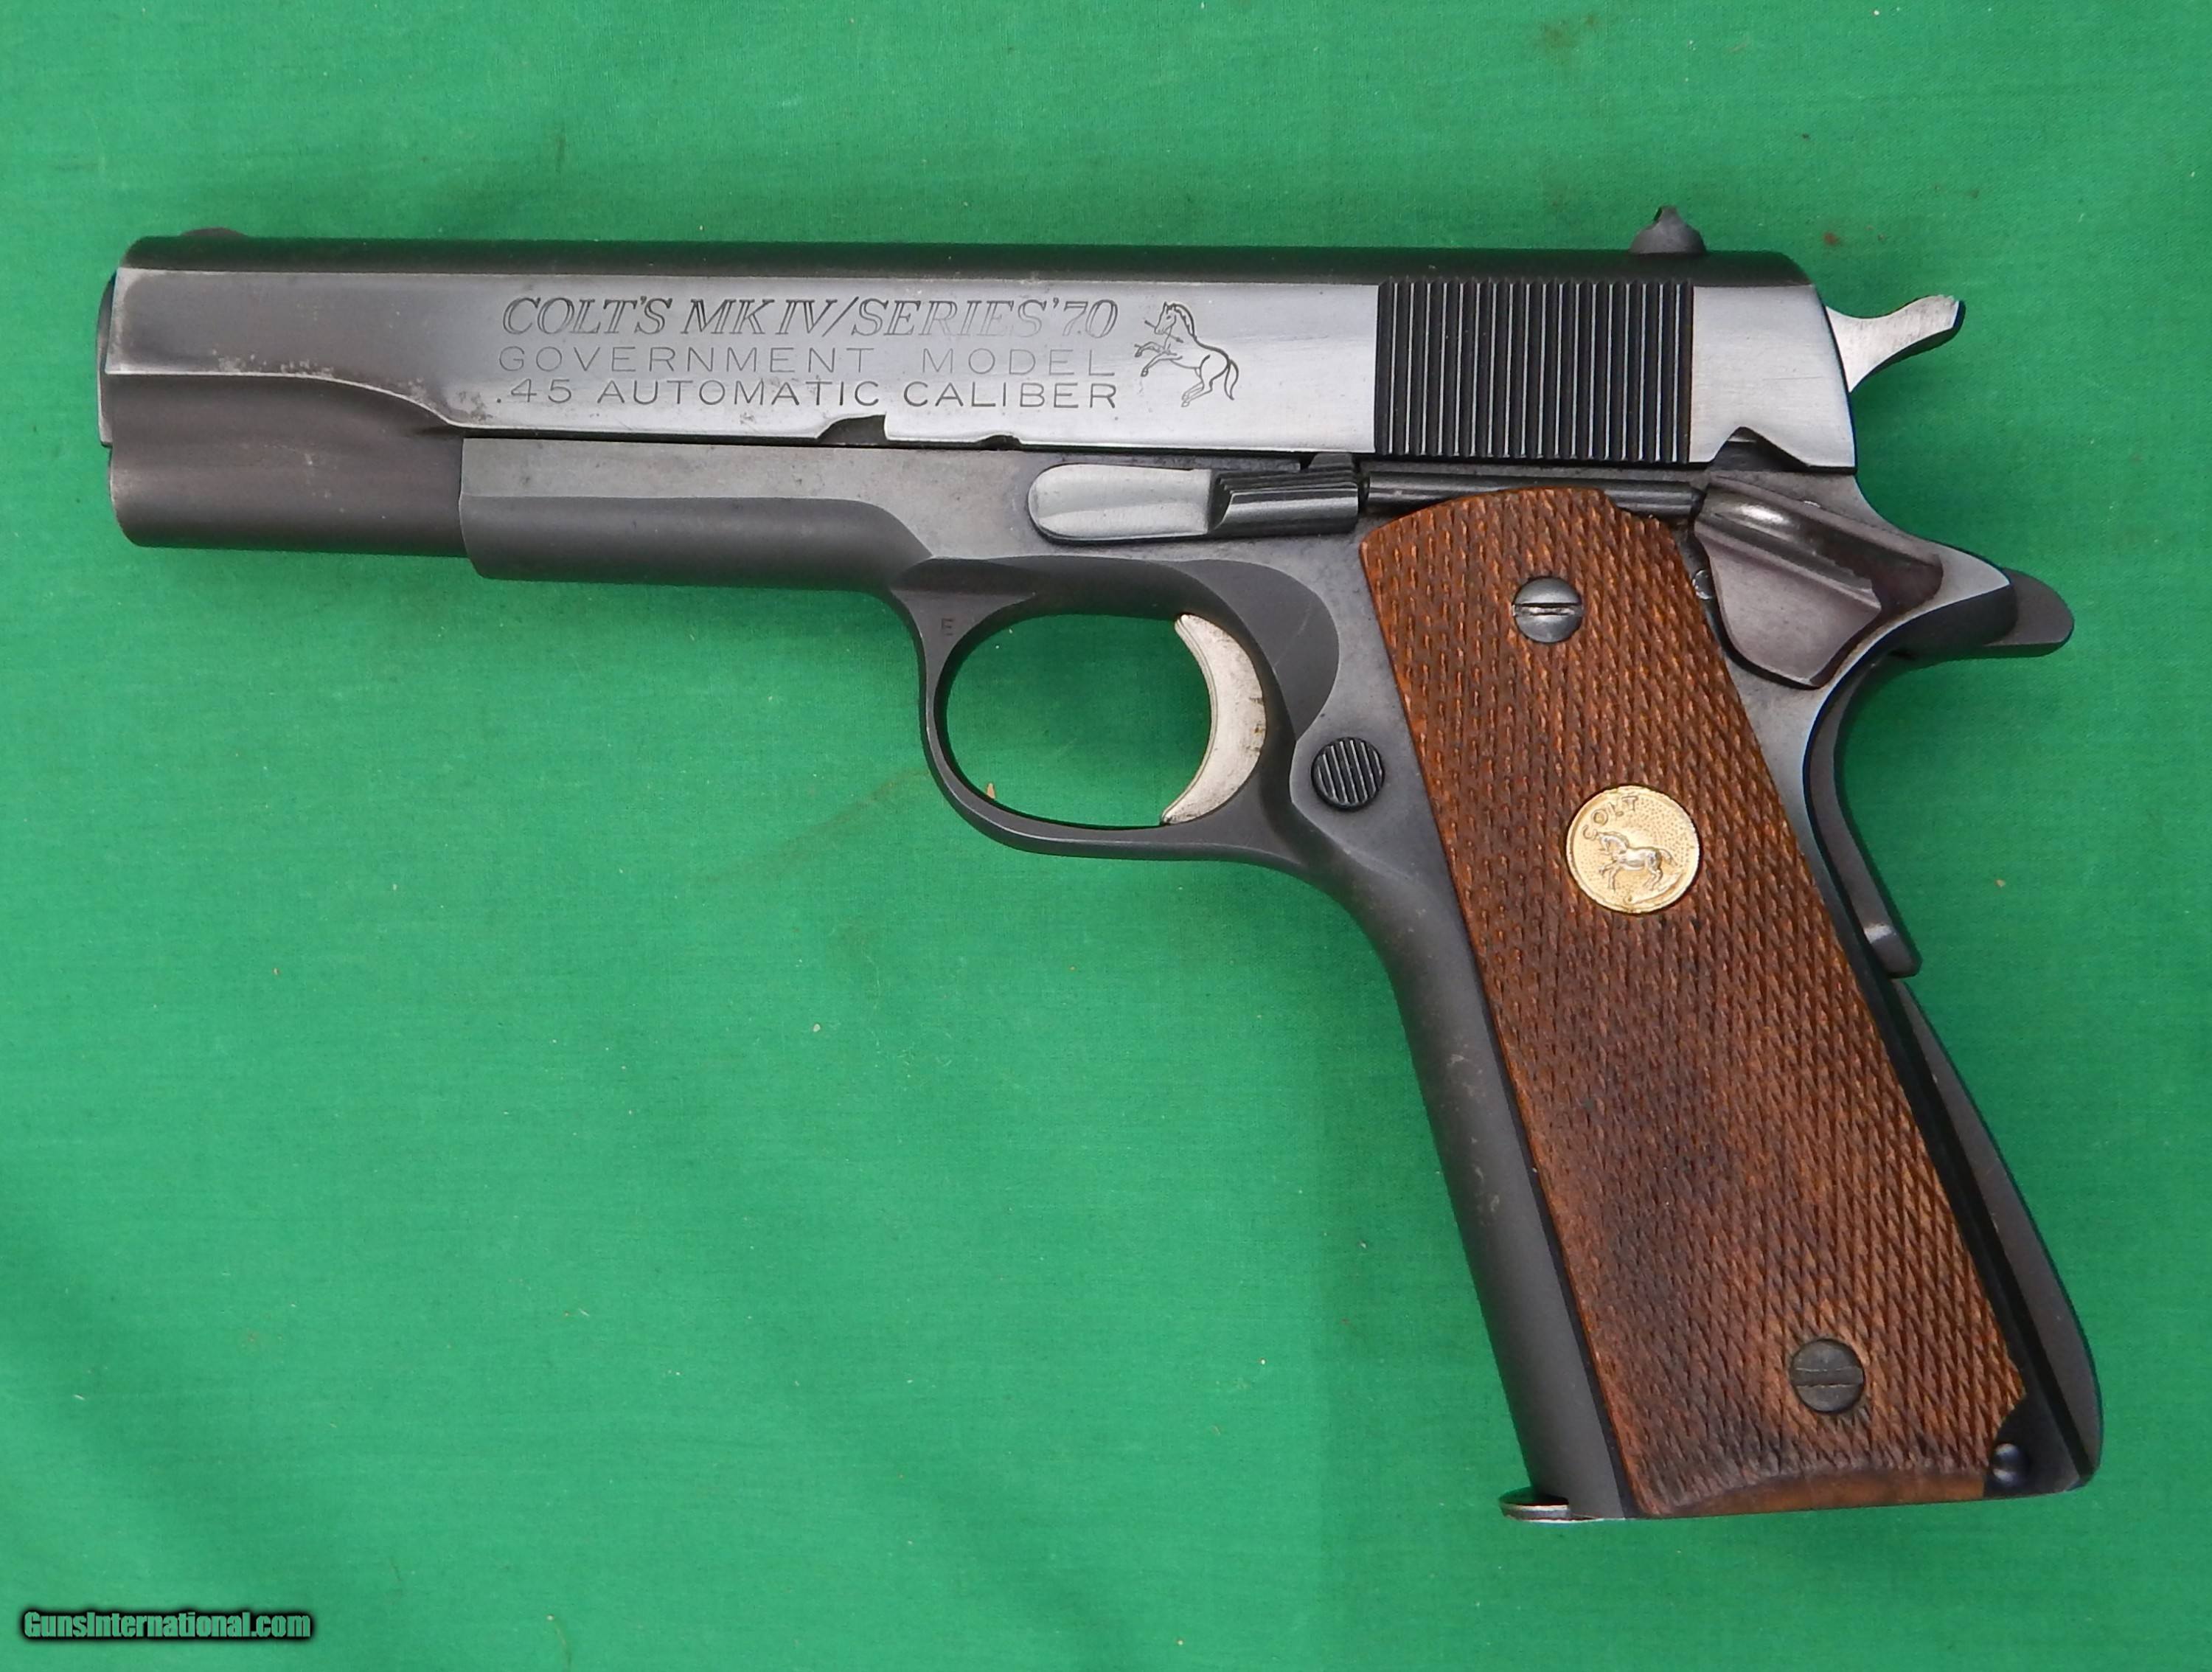 Colt's MK IV Series 70, Government Model 45 Automatic